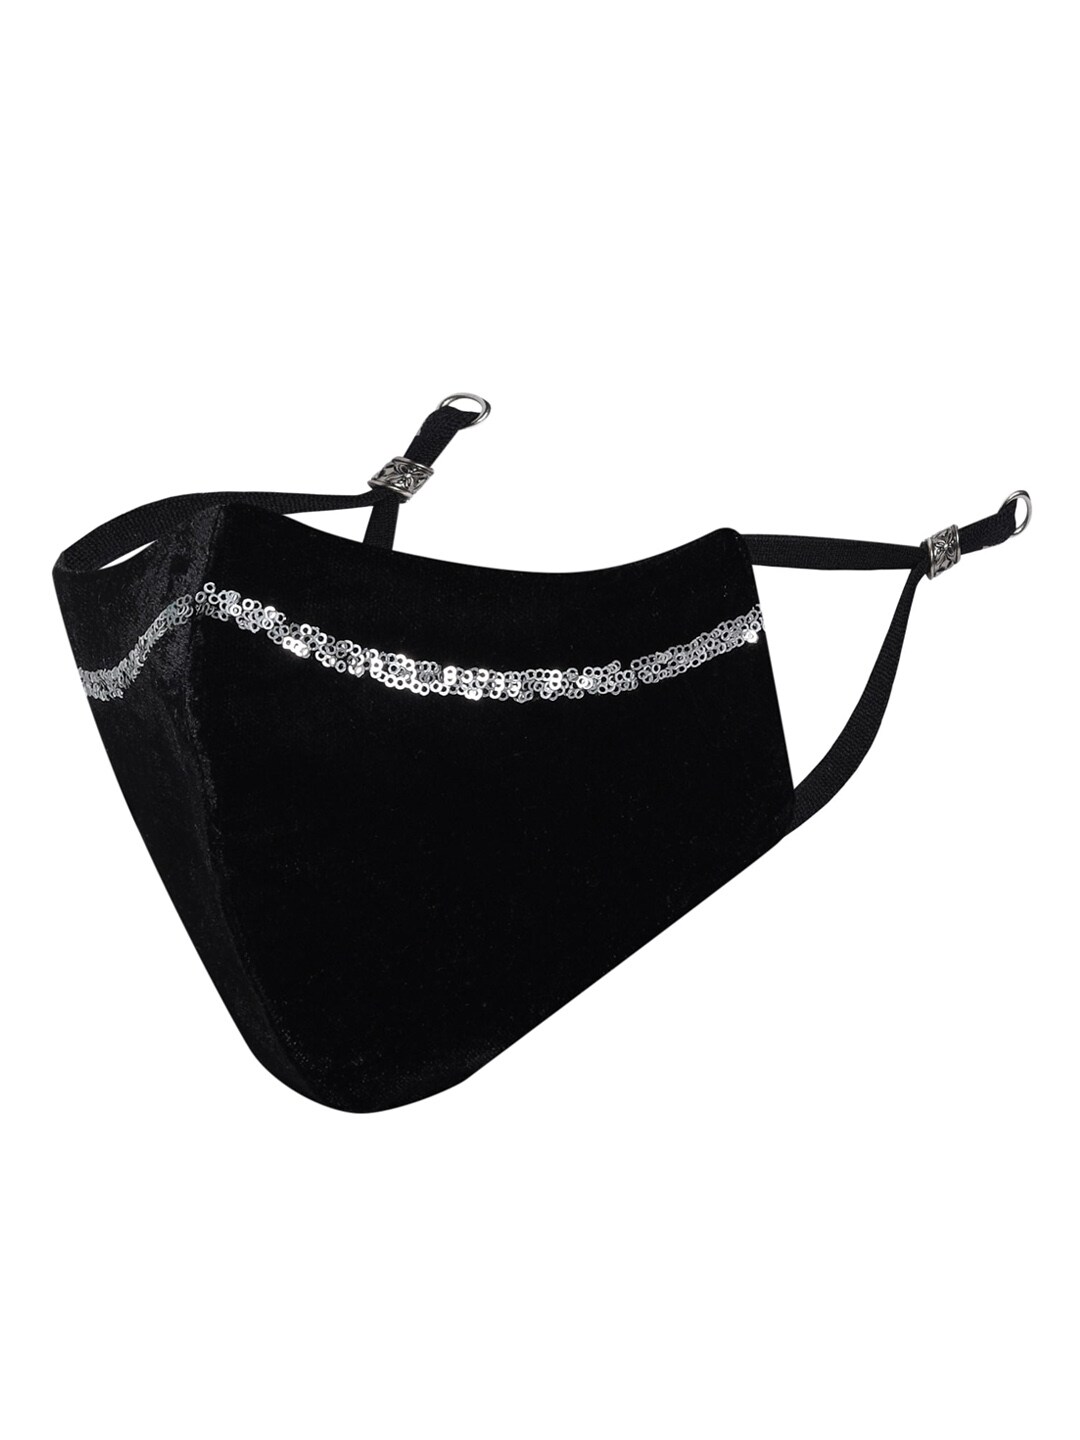 MASQ Black Solid 4-Ply Velvet Cloth Mask with Sequinned Detail Price in India